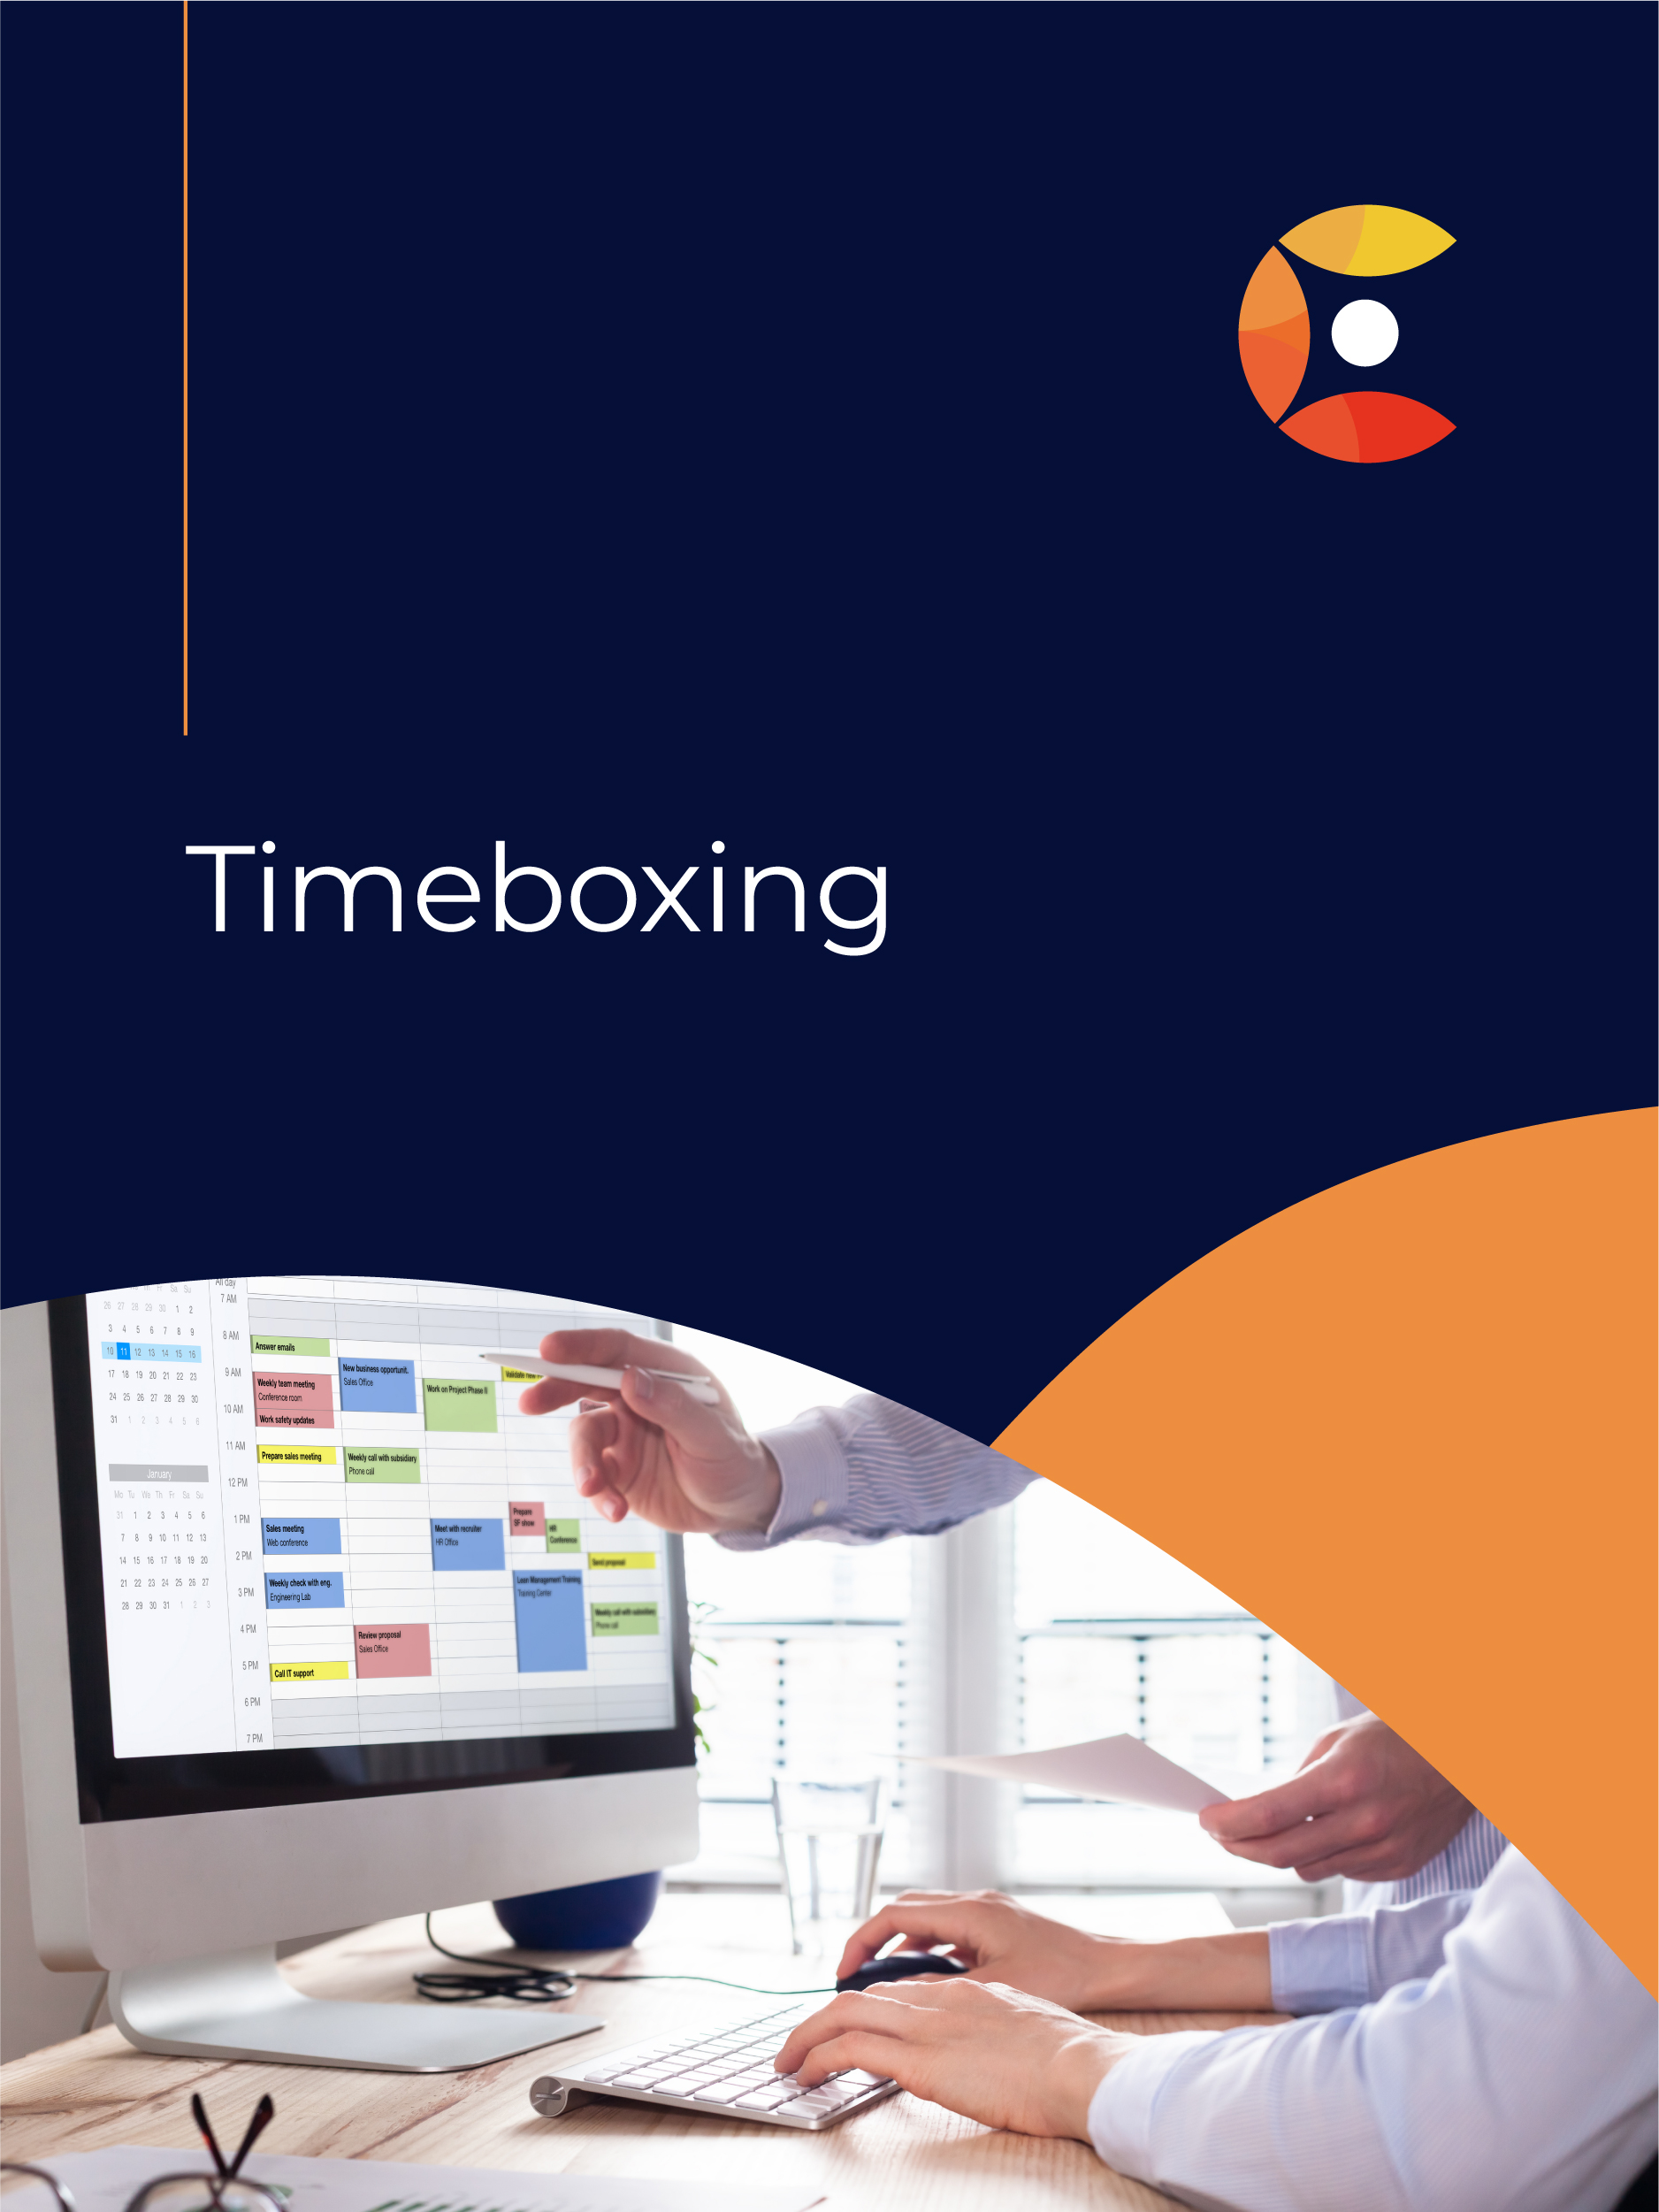 Benefits of Timeboxing